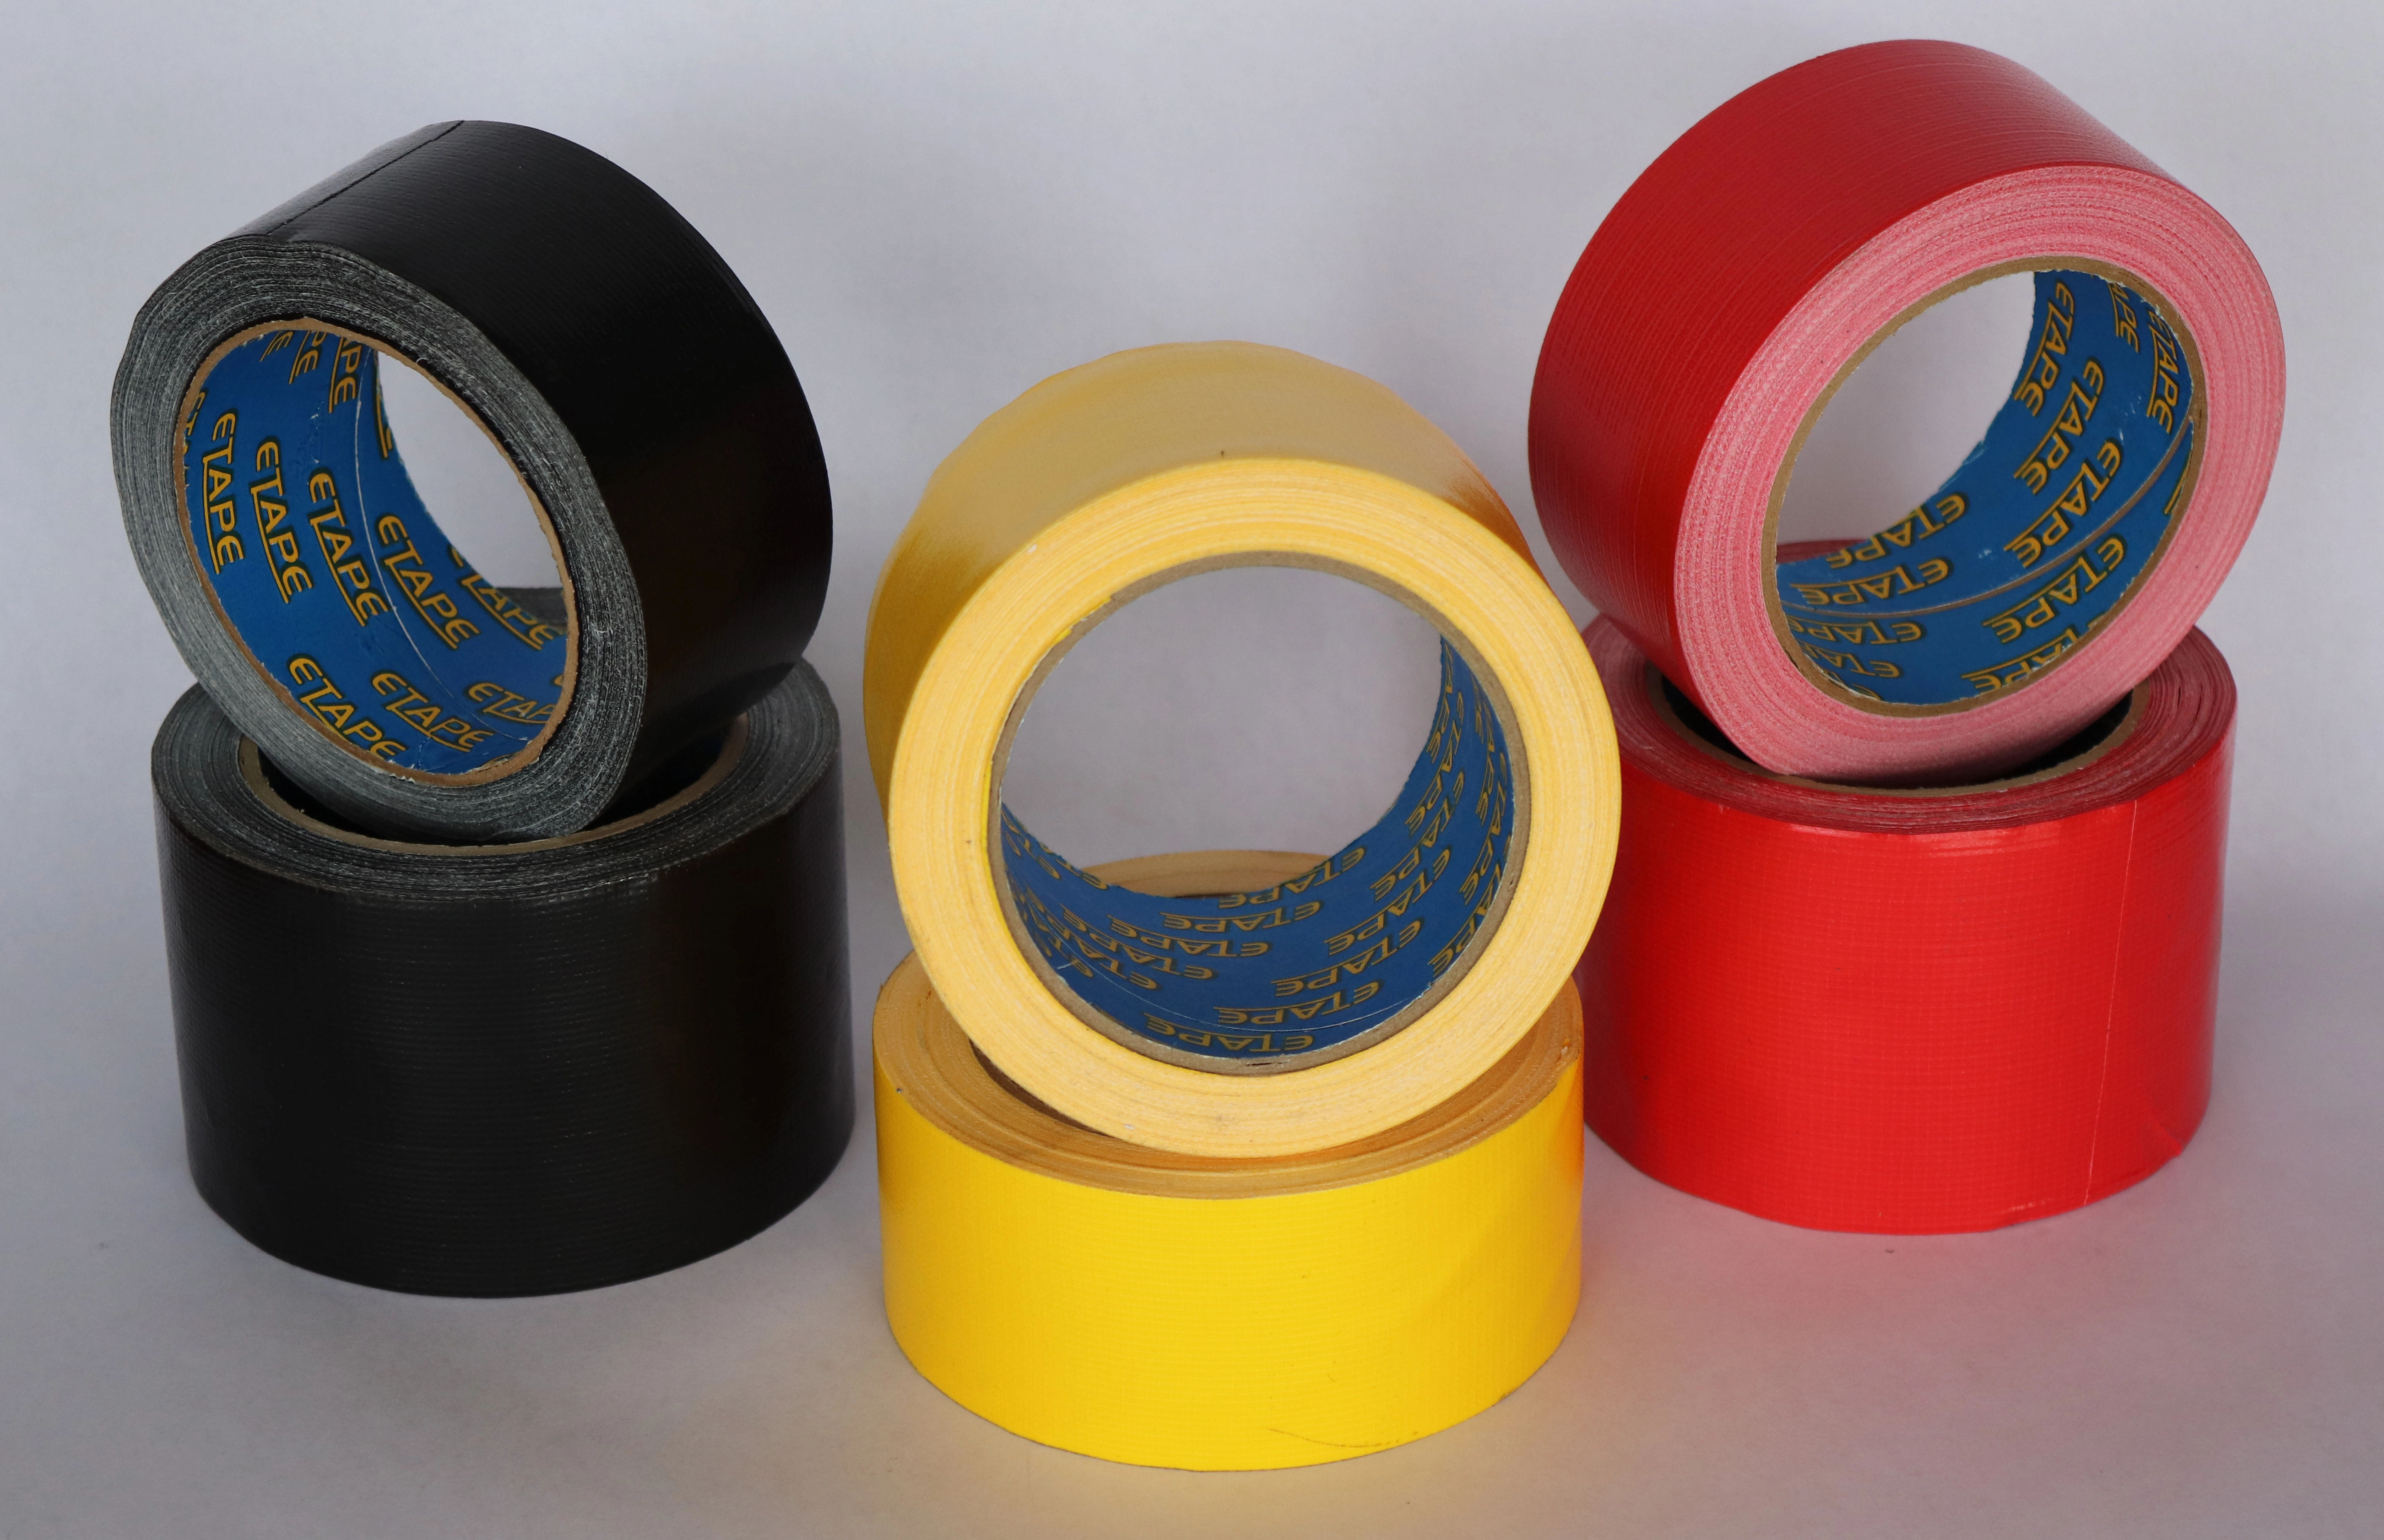 Duct tape shown in different colours and widths sold by Easitape